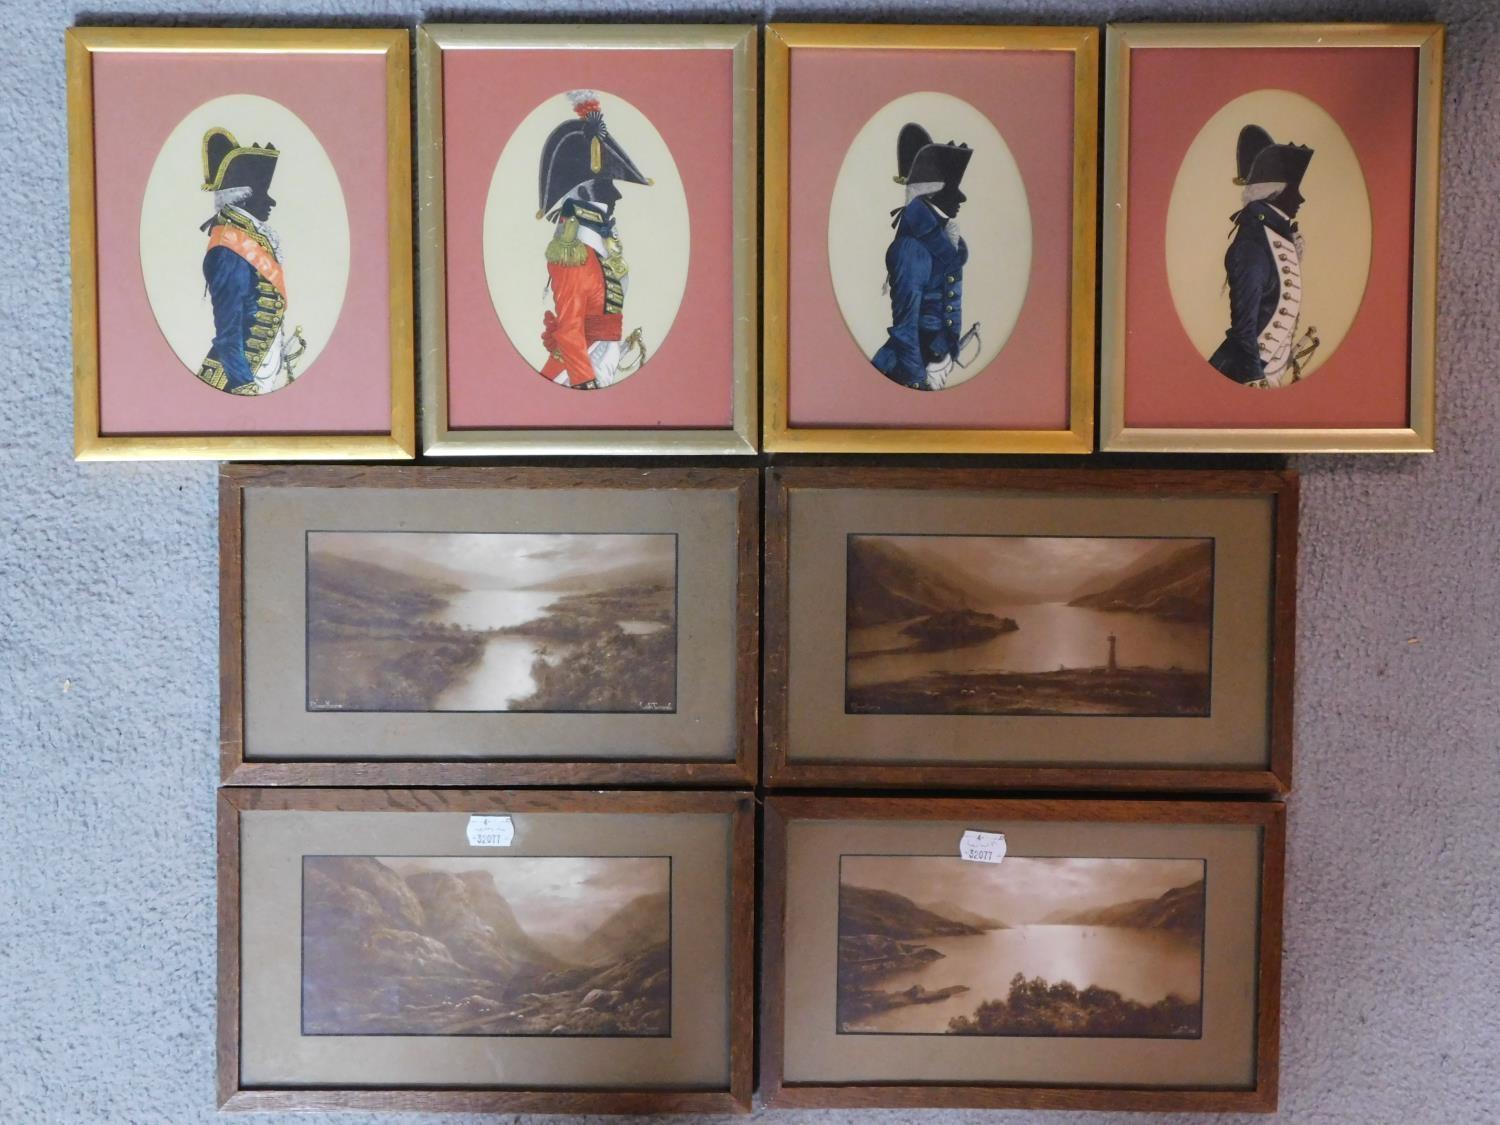 Eight framed and glazed prints, silhouette portraits of soldiers and various landscape sceneries.